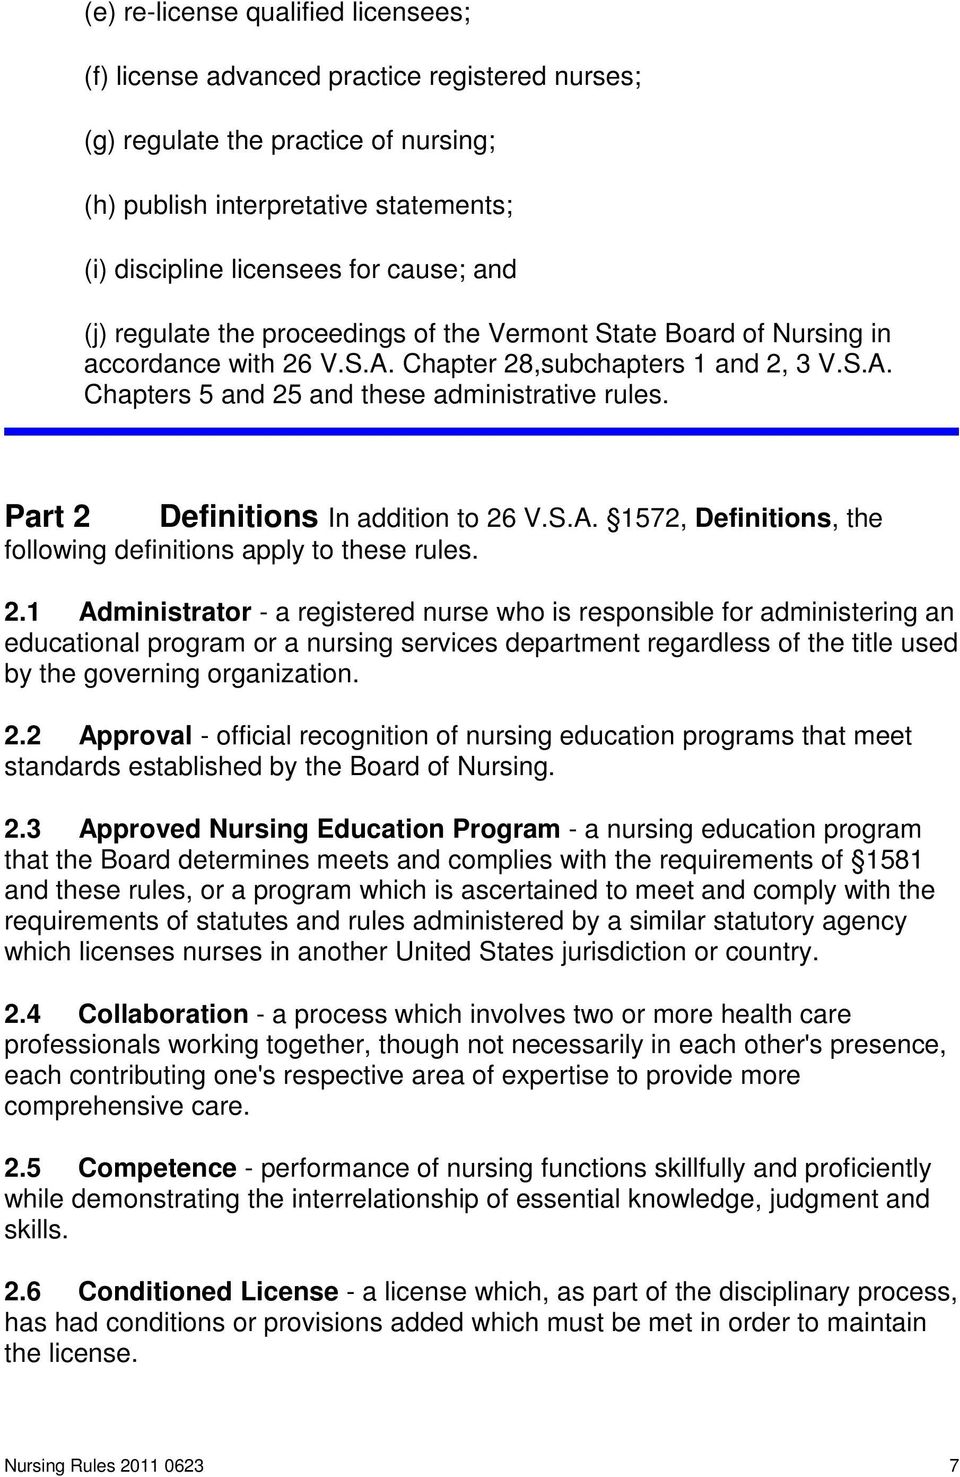 Part 2 Definitions In addition to 26 V.S.A. 1572, Definitions, the following definitions apply to these rules. 2.1 Administrator - a registered nurse who is responsible for administering an educational program or a nursing services department regardless of the title used by the governing organization.